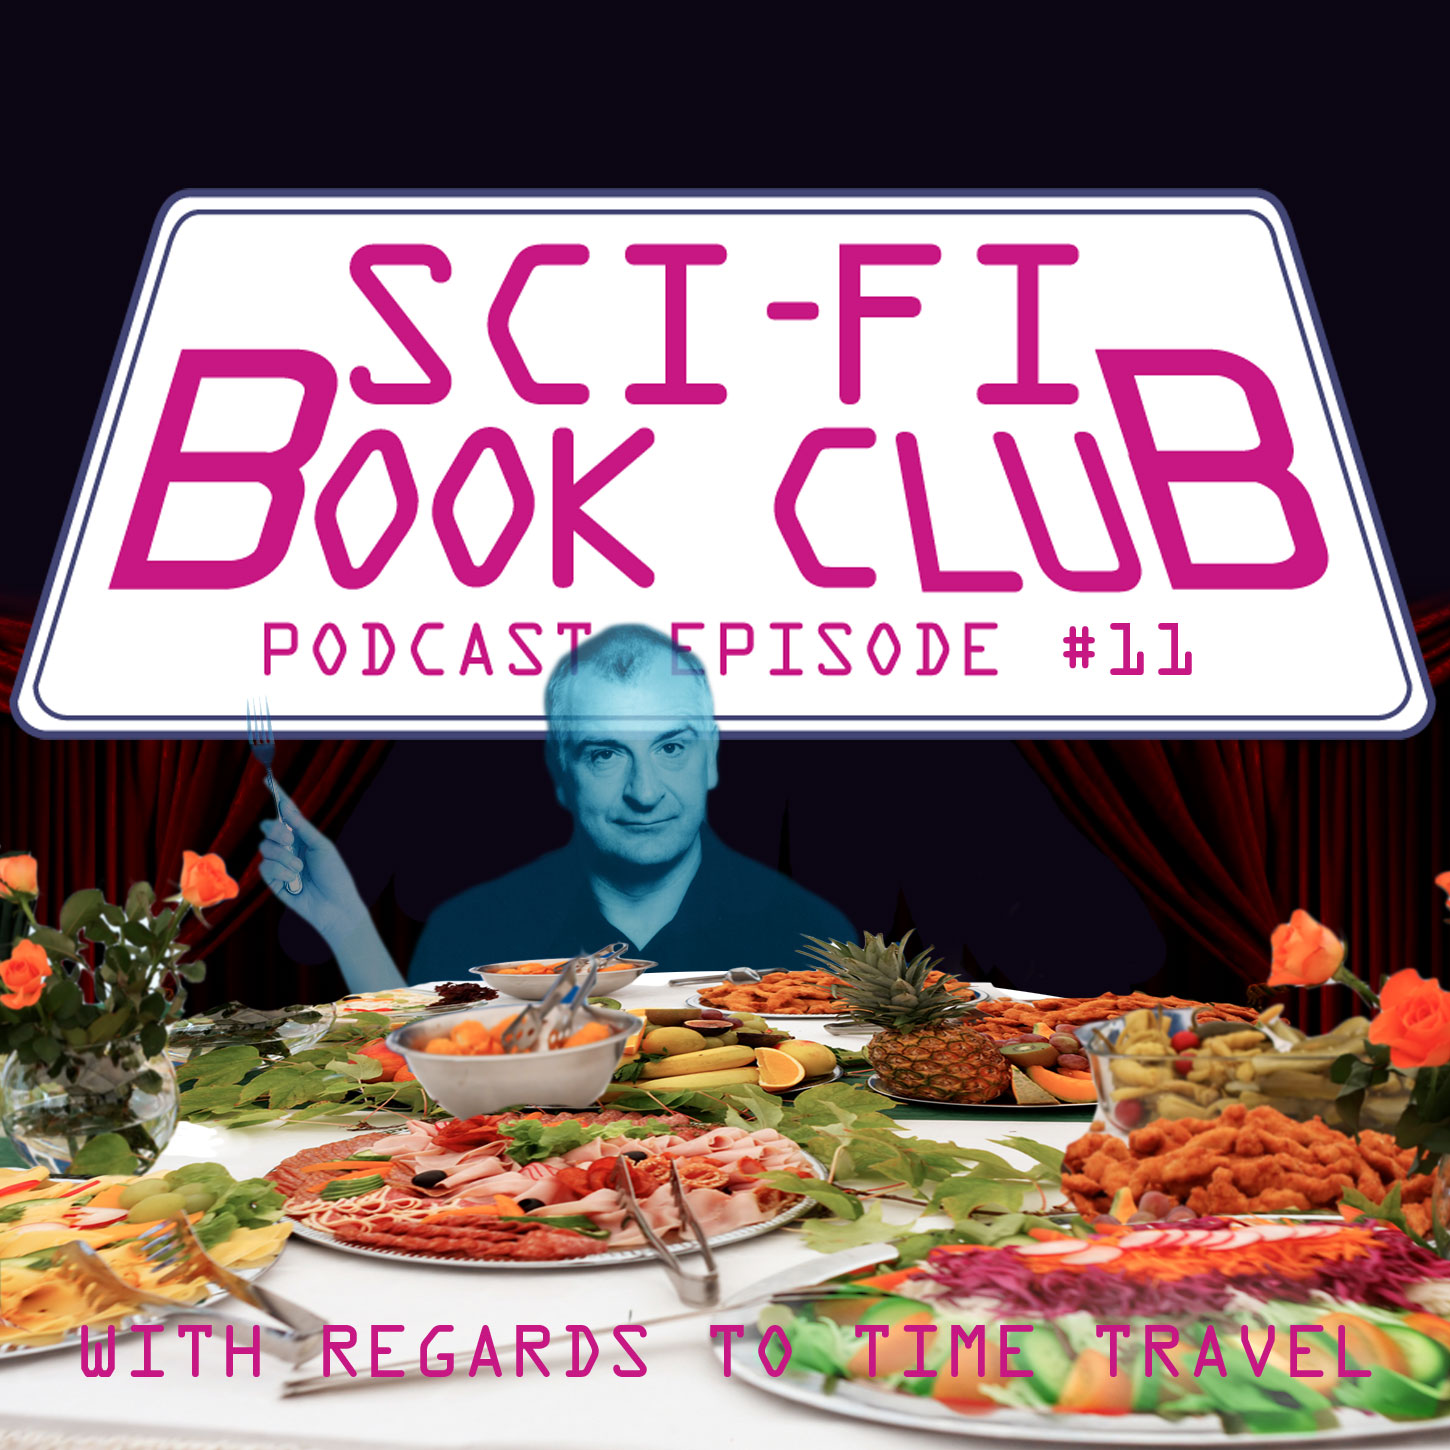 Sci-Fi Book Club Podcast #11: With Regards to Time Travel